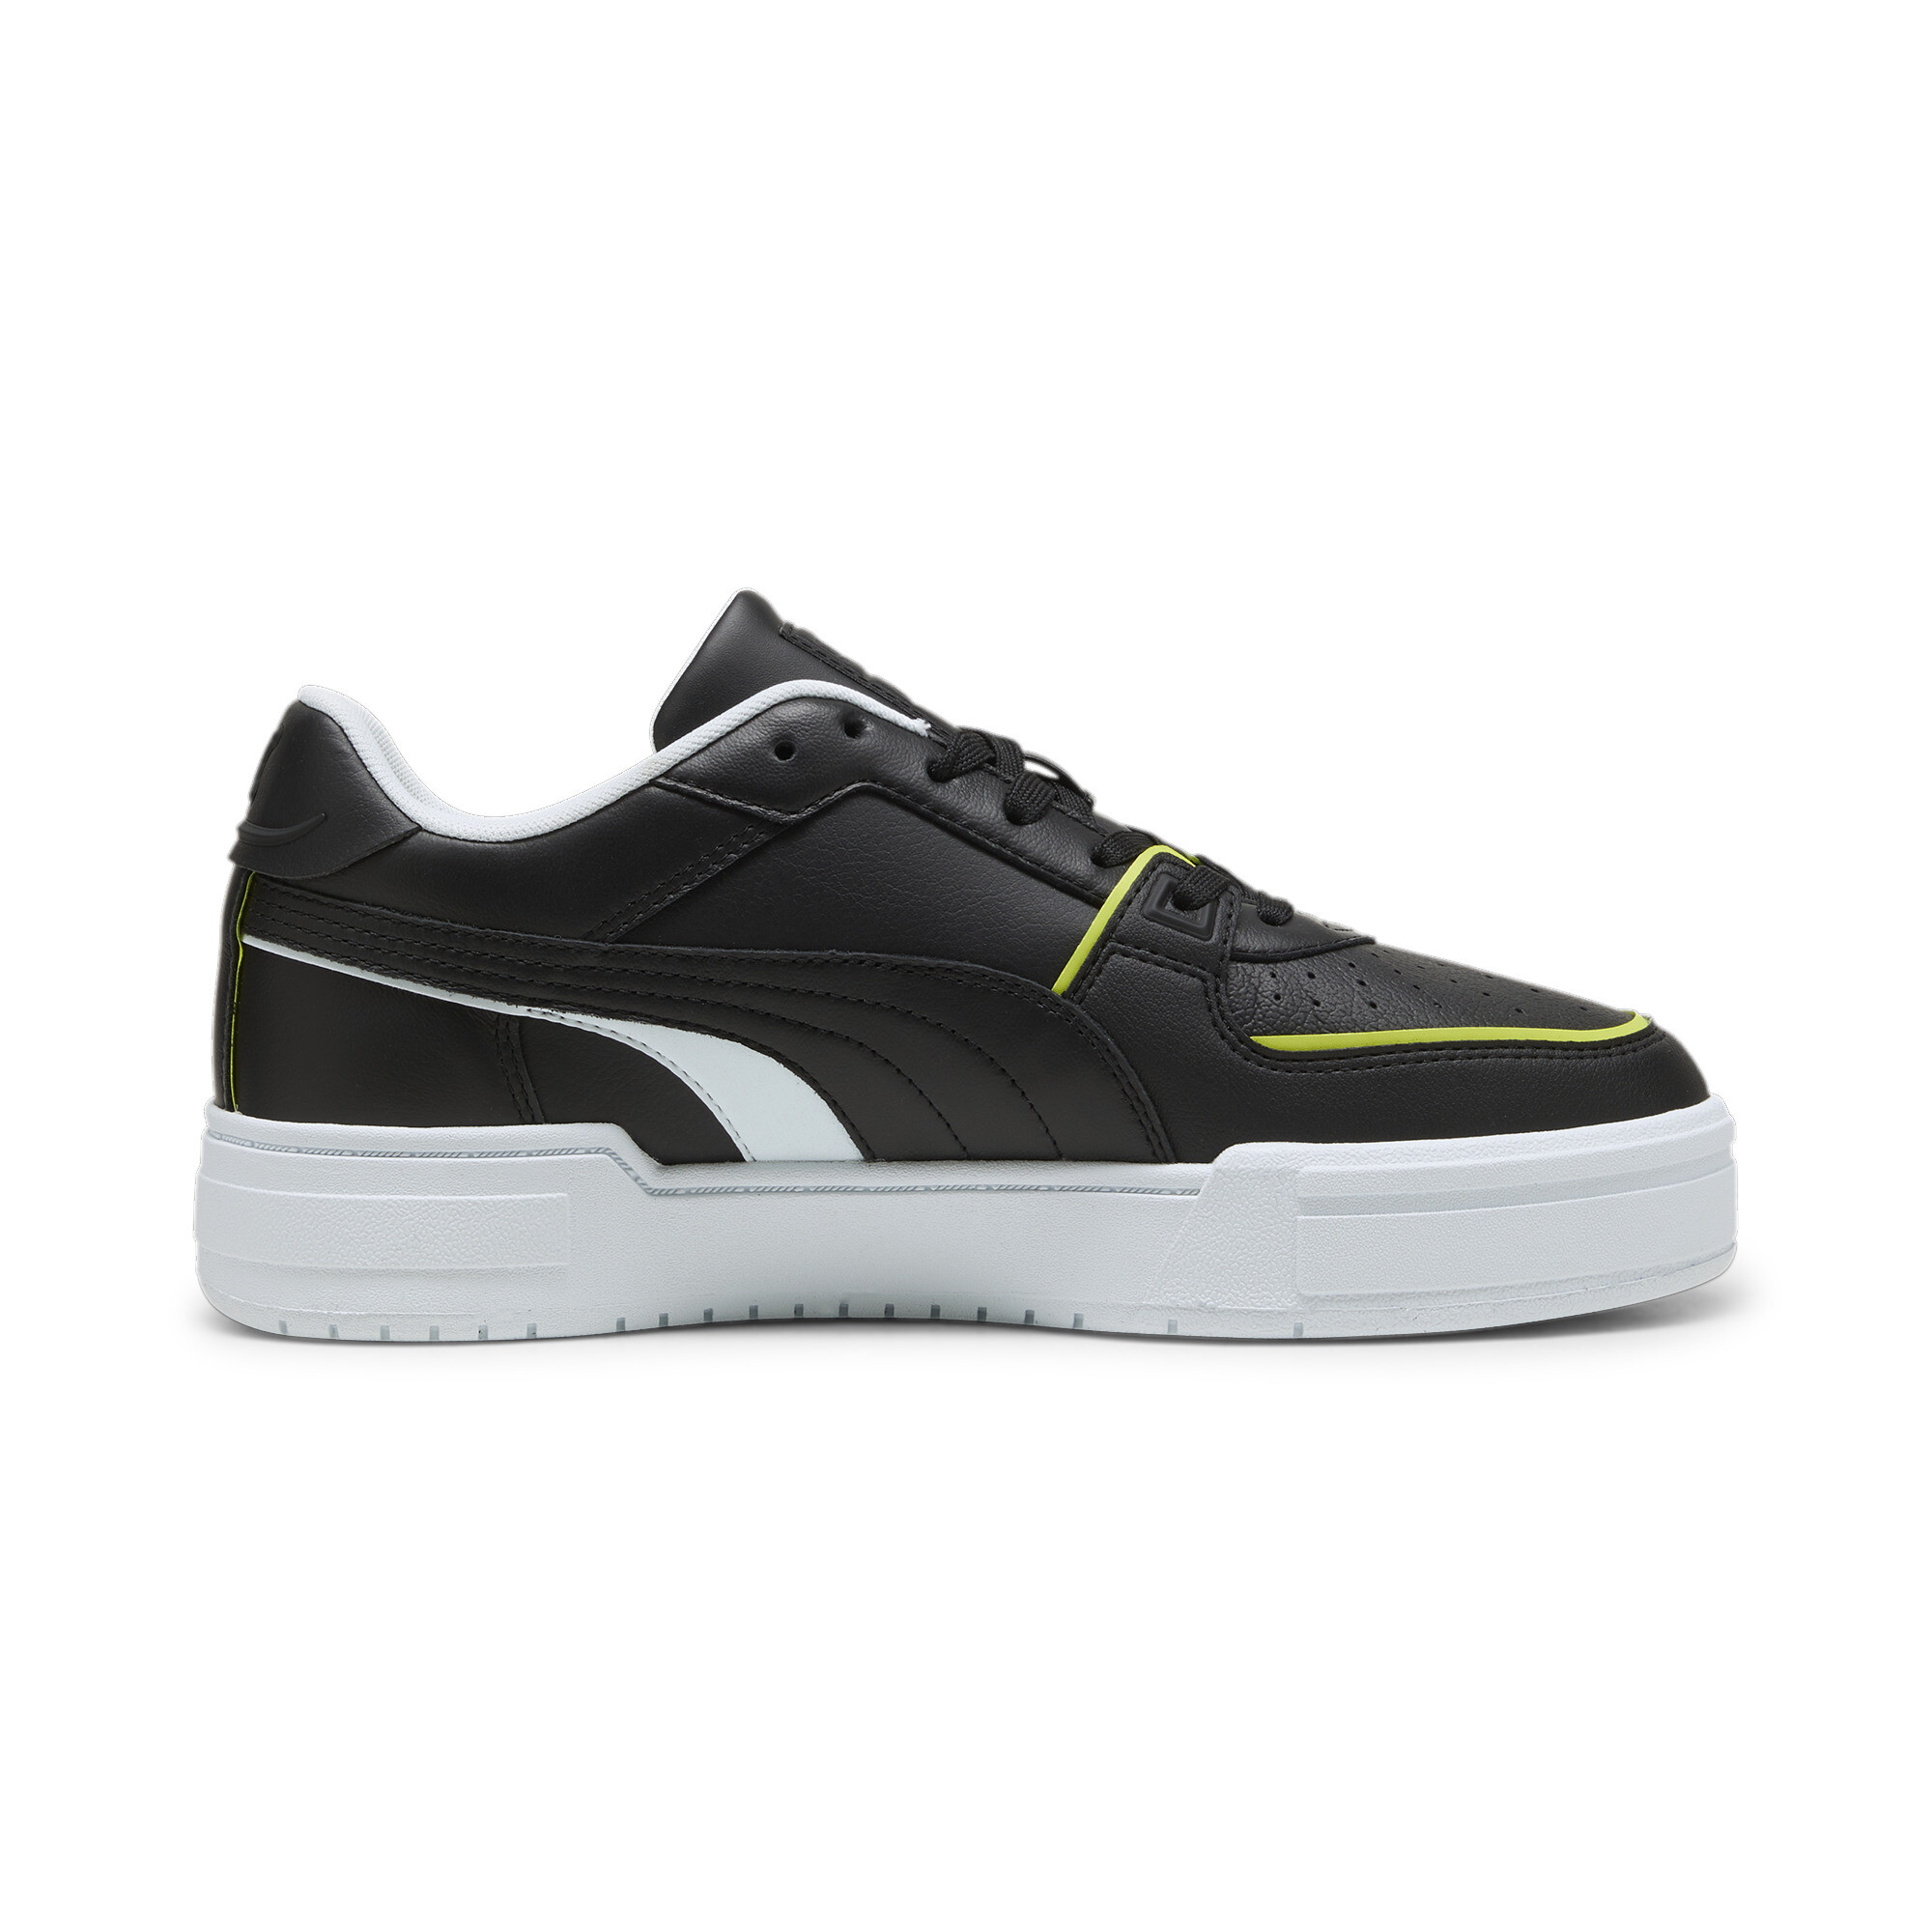 Puma AMG CA Pro Sneakers, Black, Size 47, Shoes